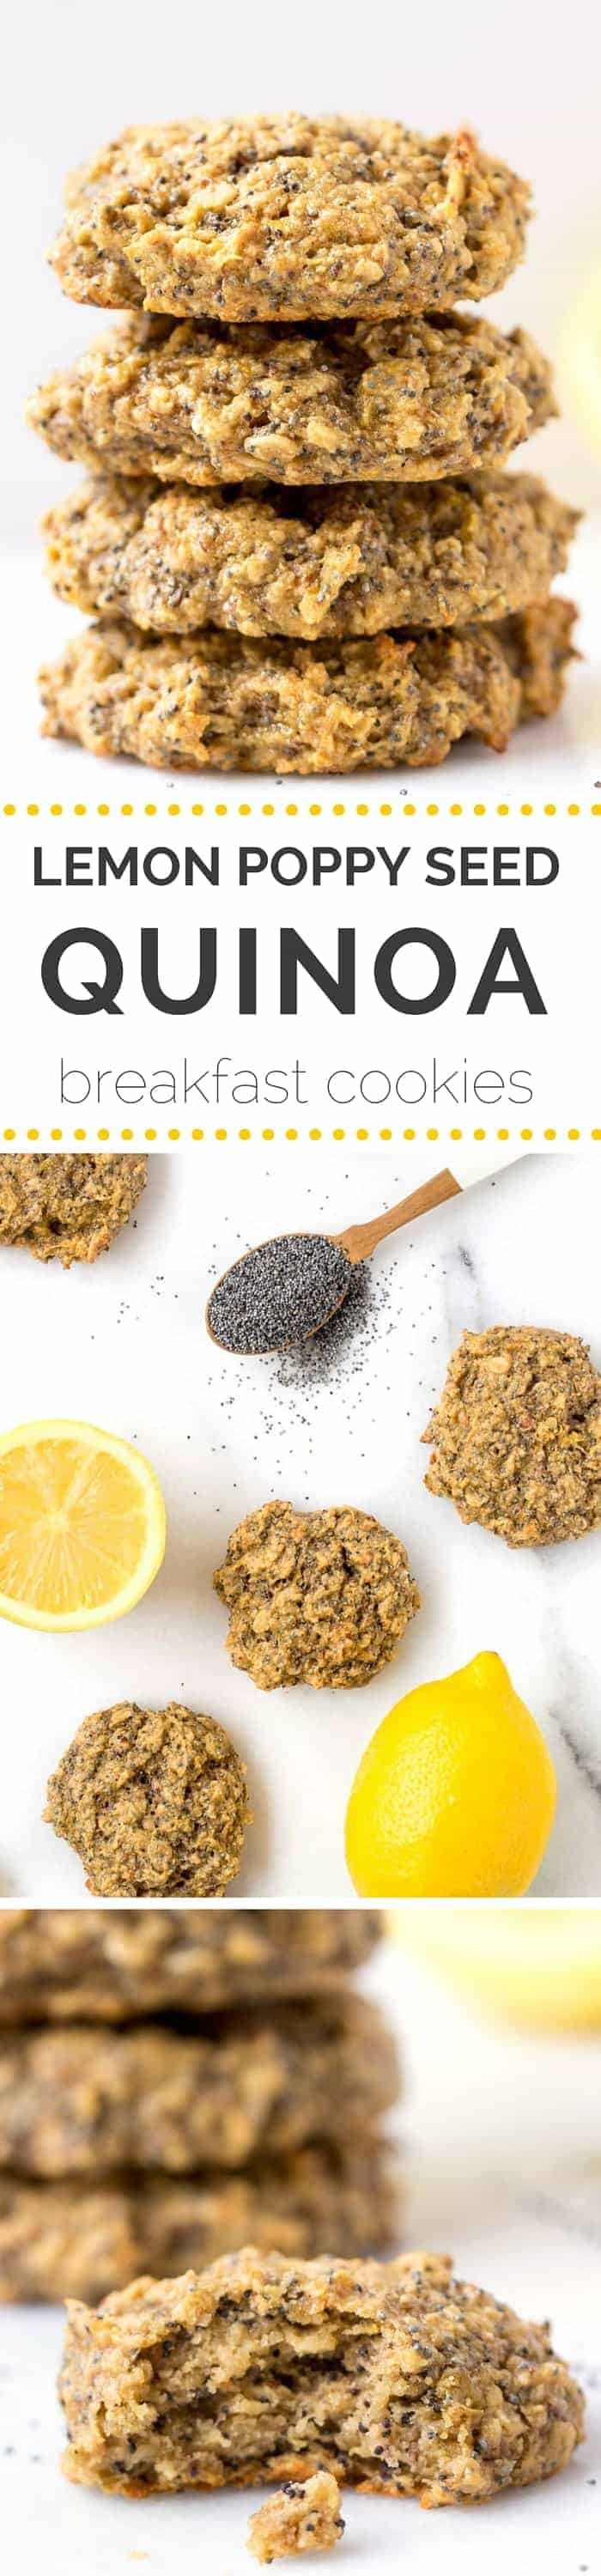 Lemon Poppy Seed Quinoa Breakfast Cookies!! They're simple, healthy, delicious and SO FLAVORFUL!